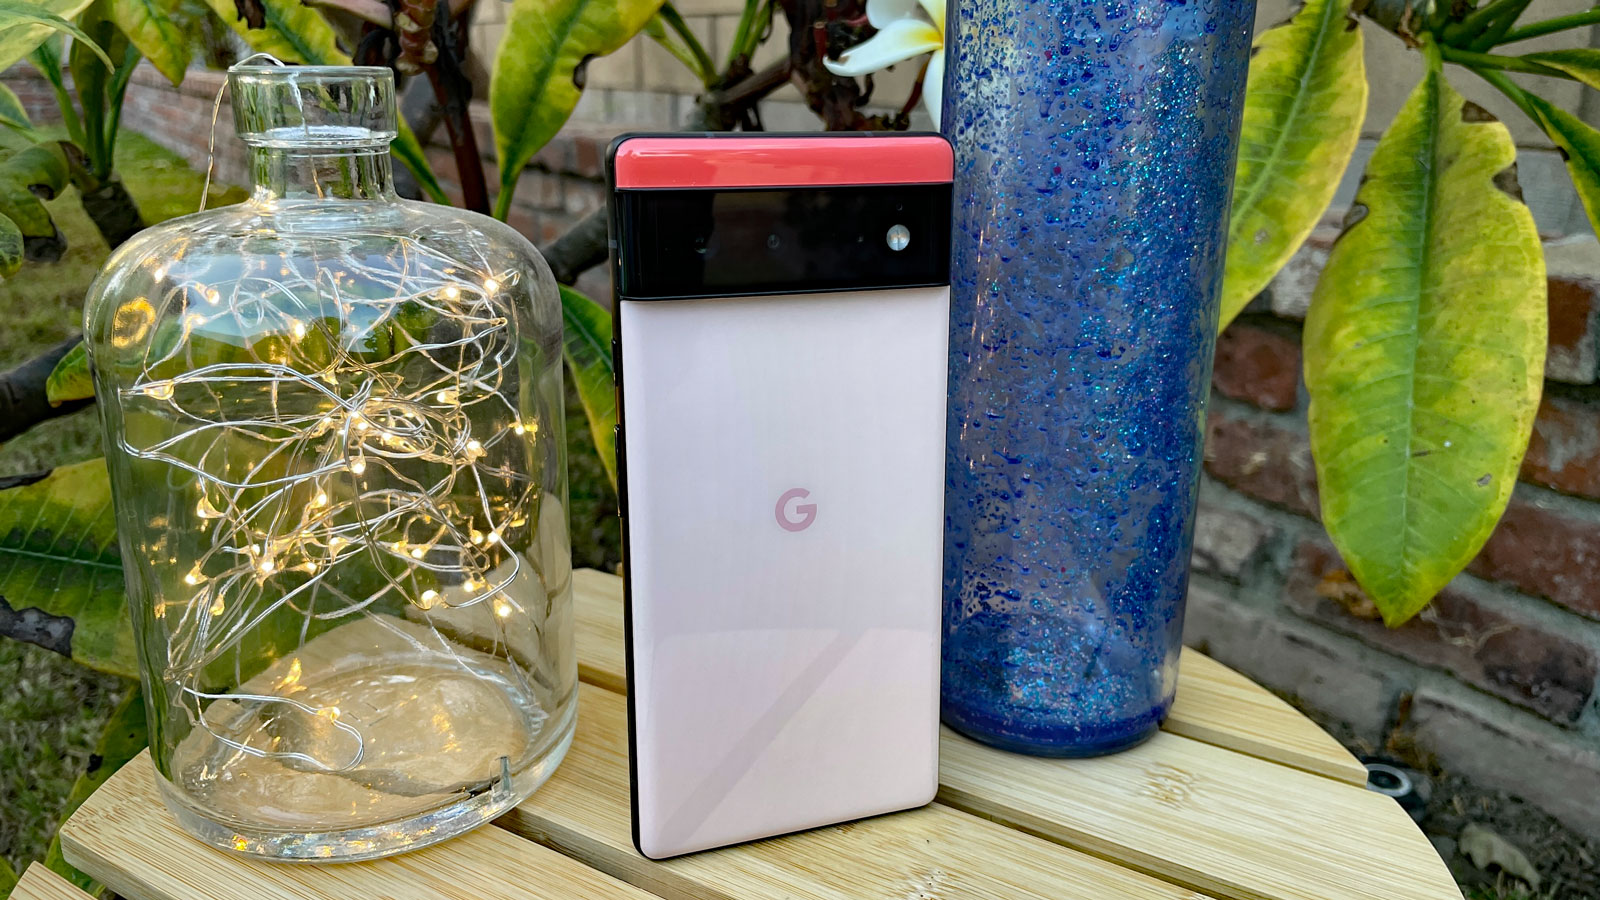 A Google Pixel 6 from behind, standing on a table next to a vase